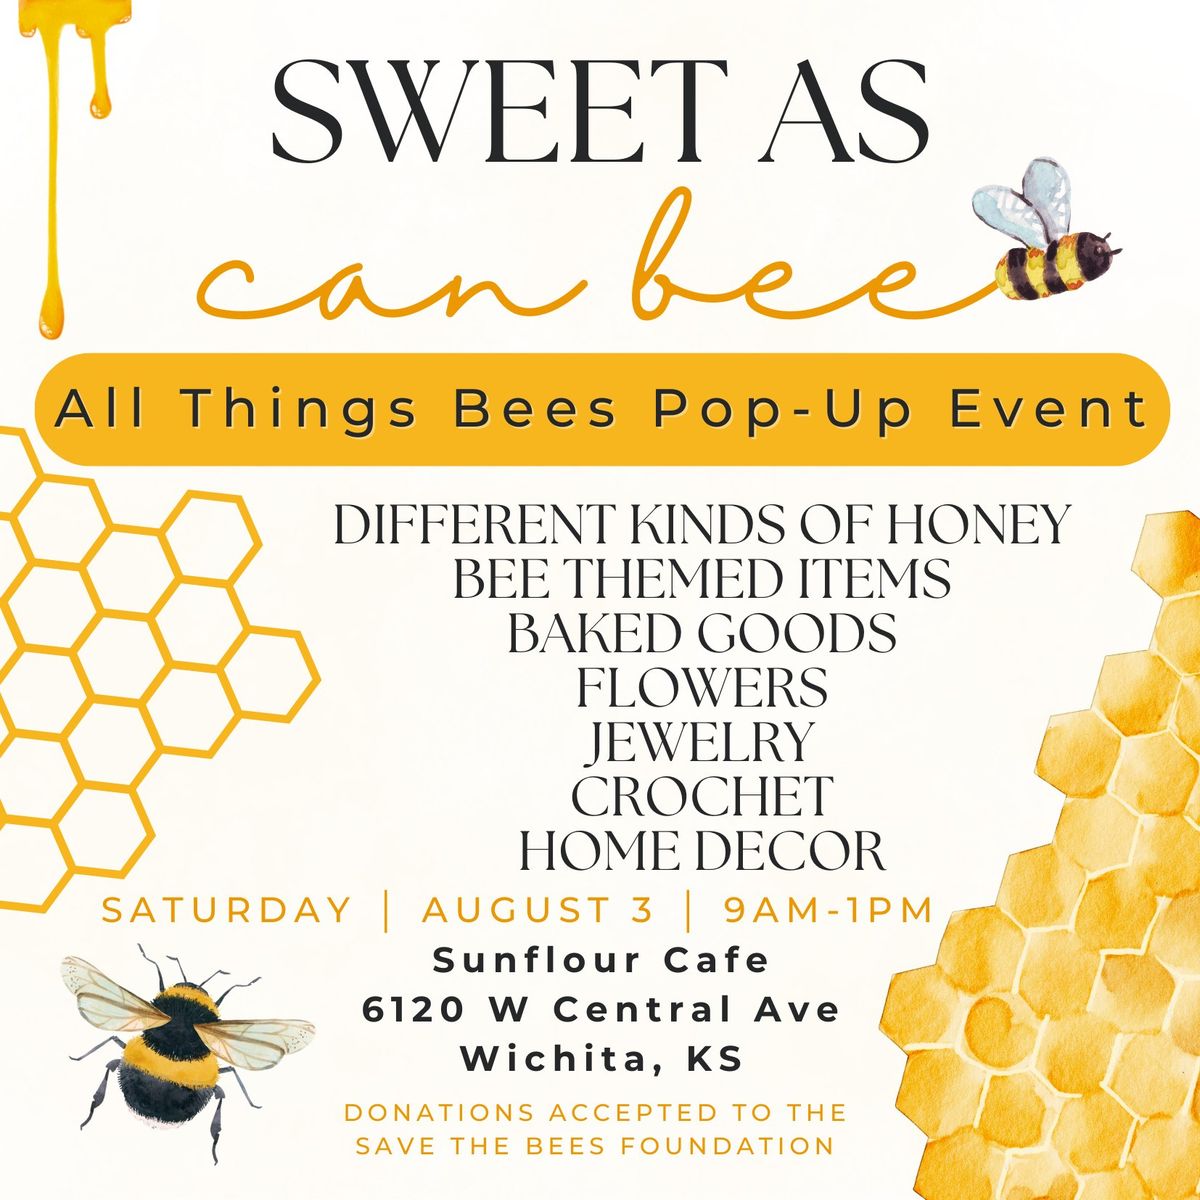 All Things Bees Pop-Up Event